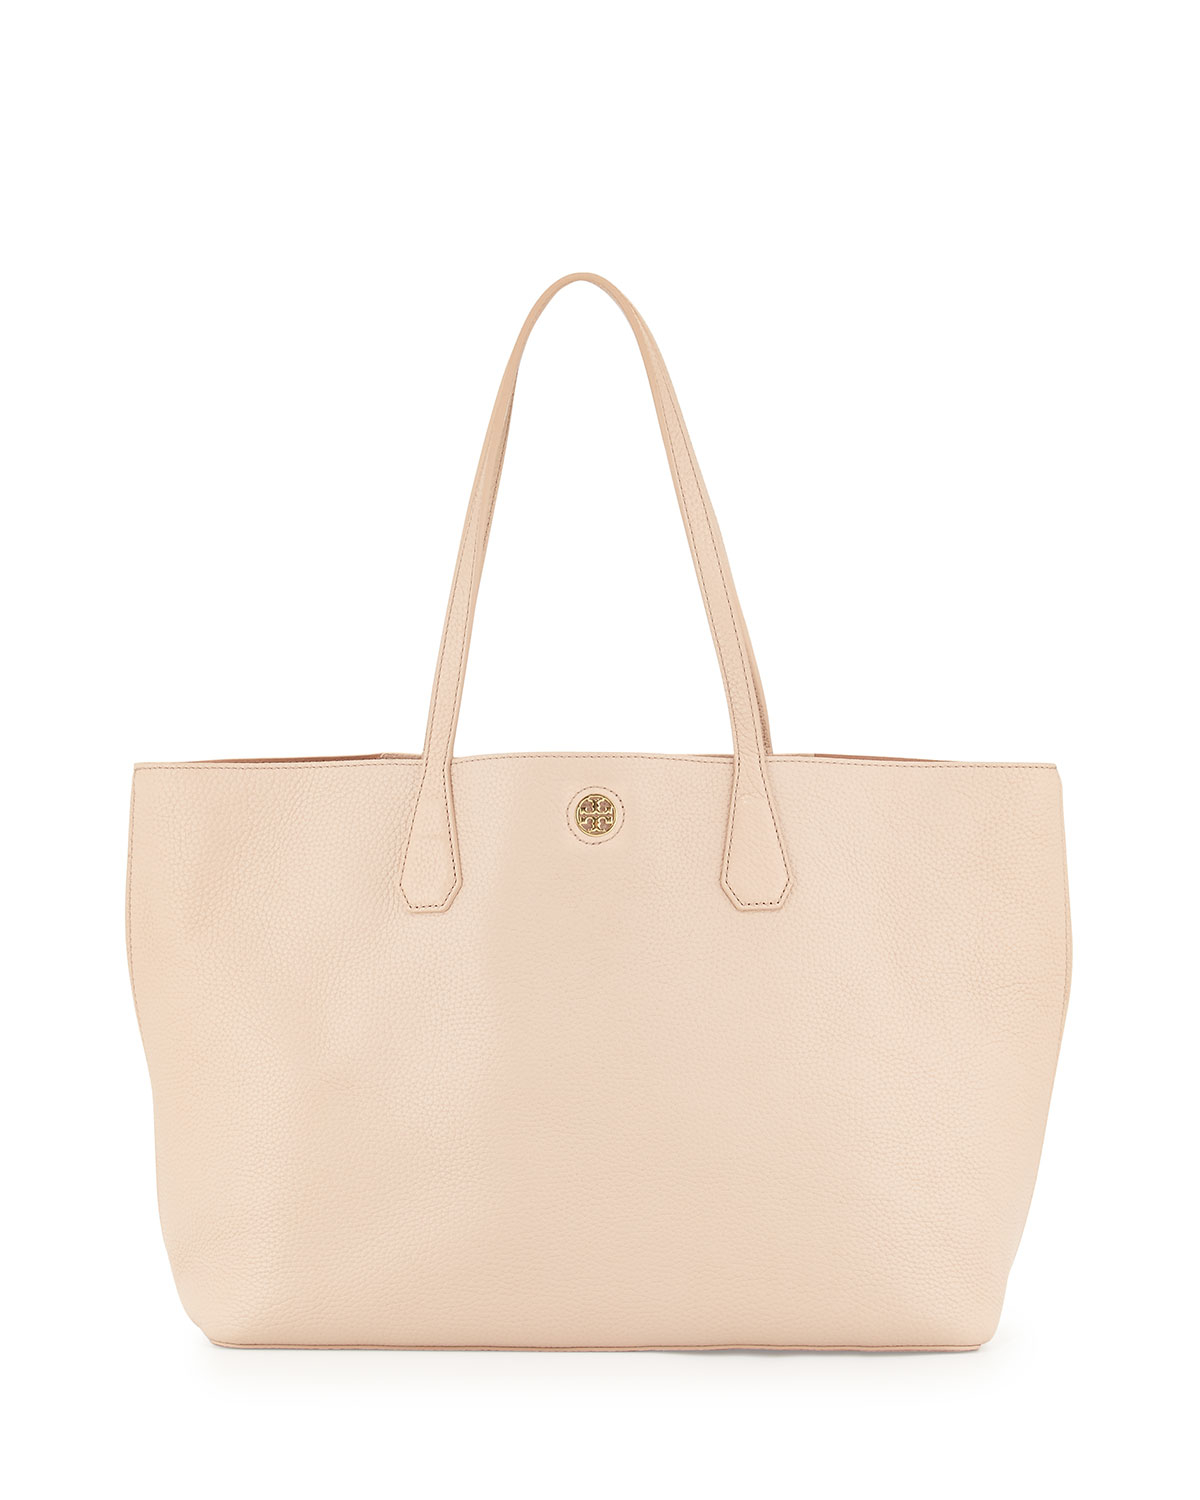 Tory Burch Perry Leather Tote Bag in Brown (LT OAK/ GINGER) | Lyst